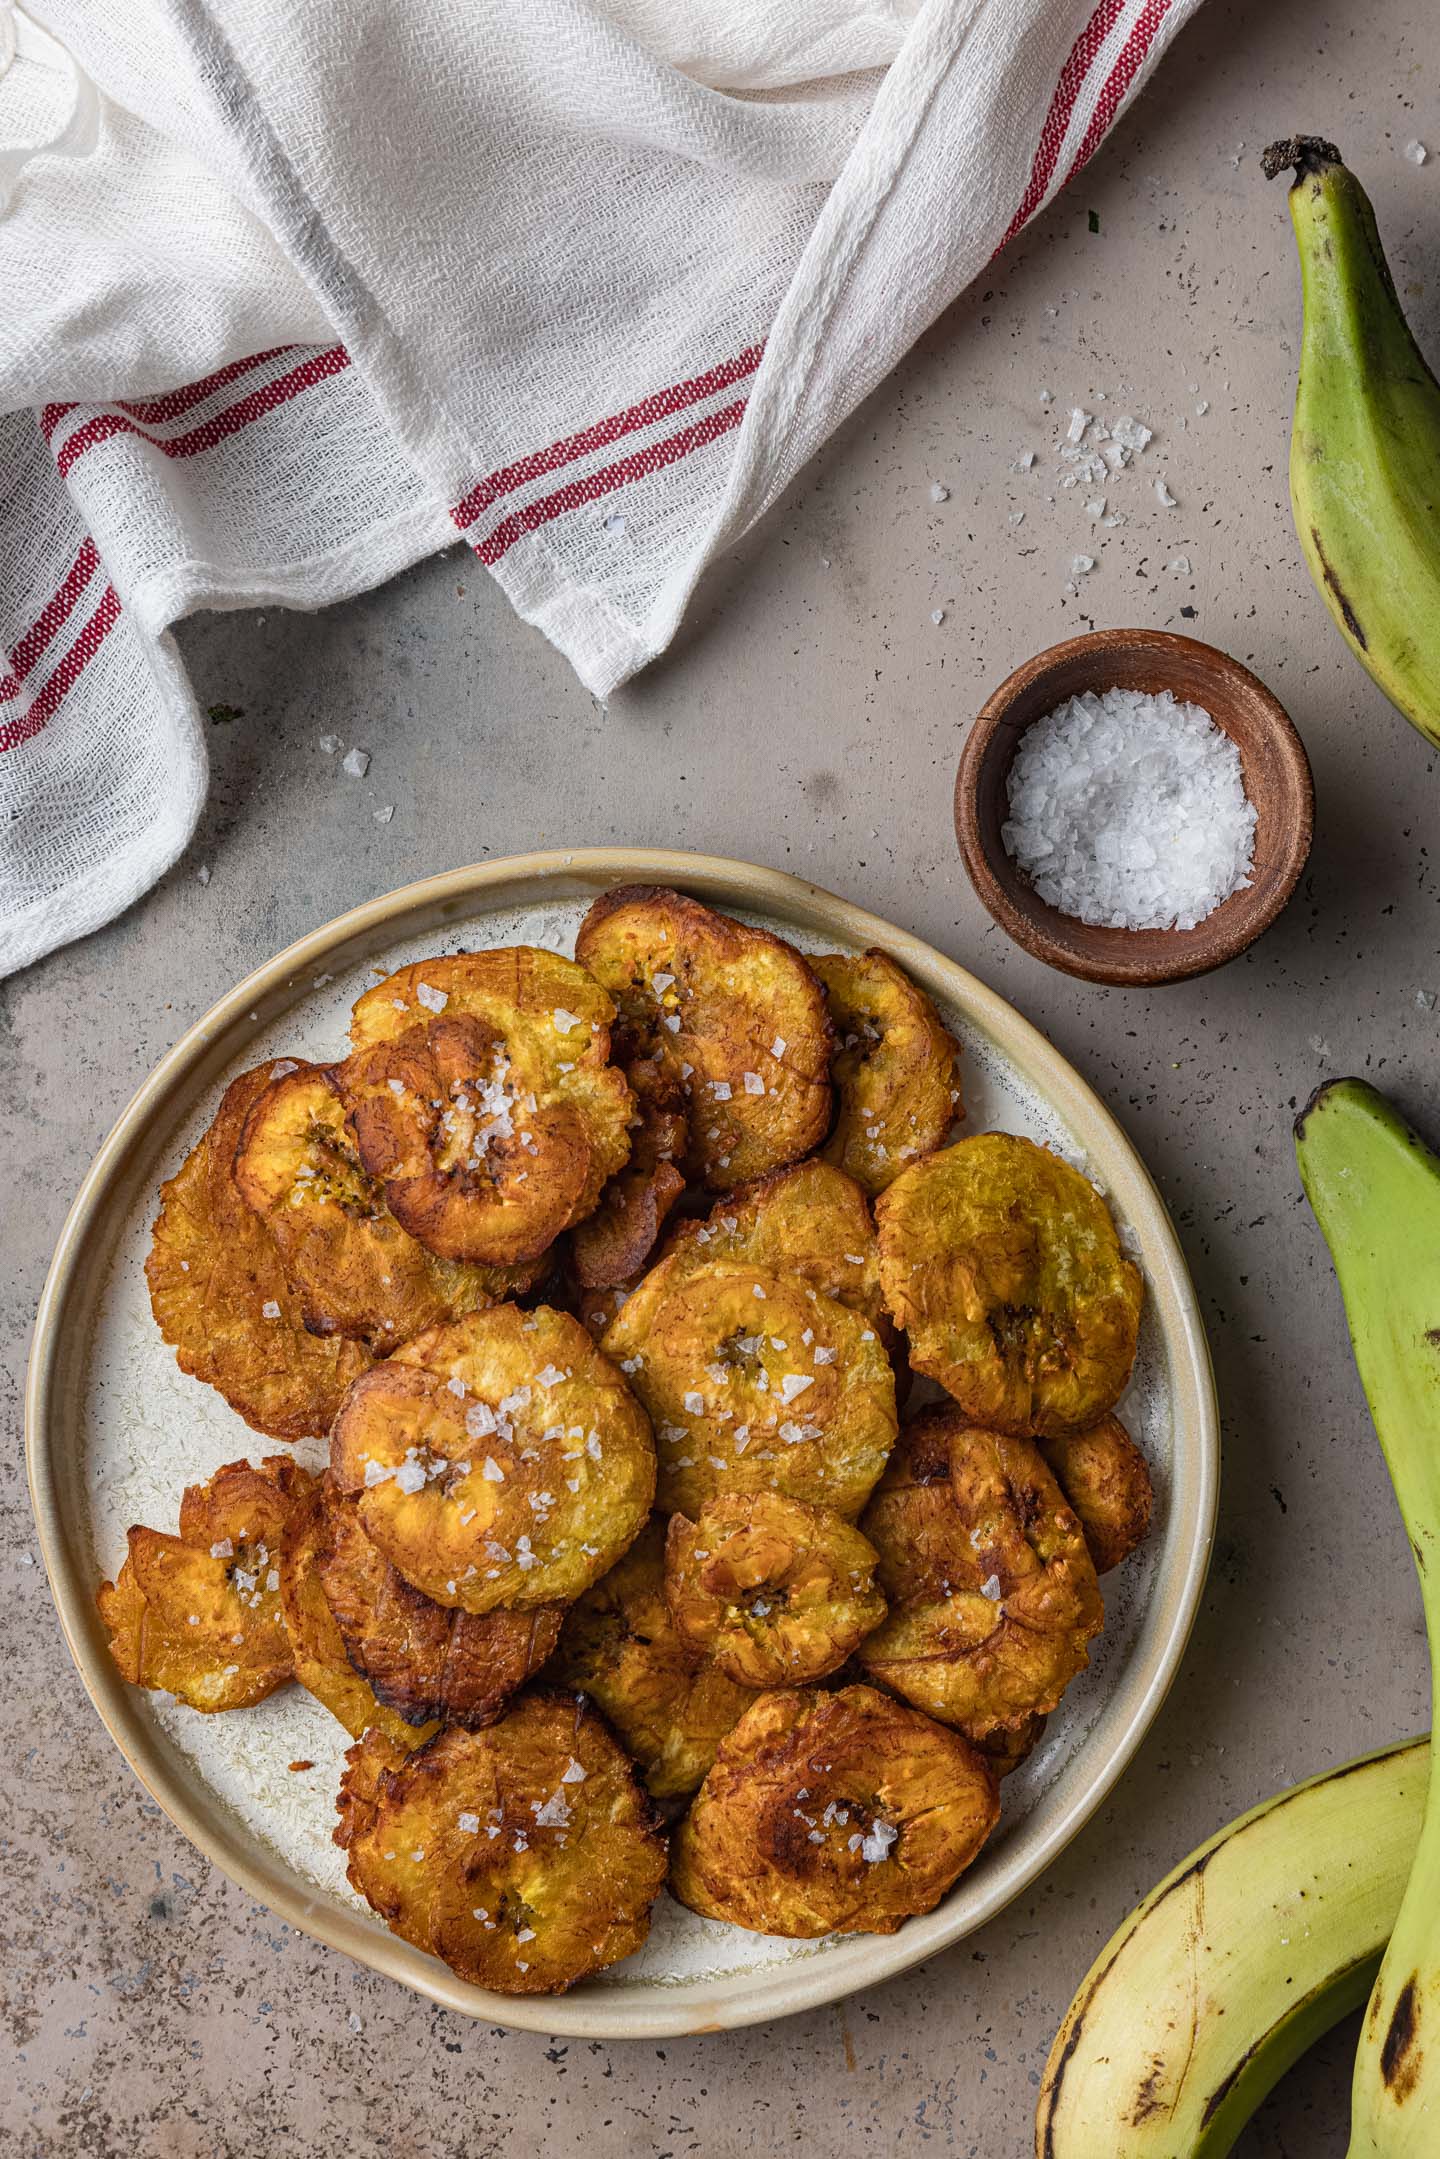 How to Make Tostones (Only 3 ingredients!) - Olivia's Cuisine